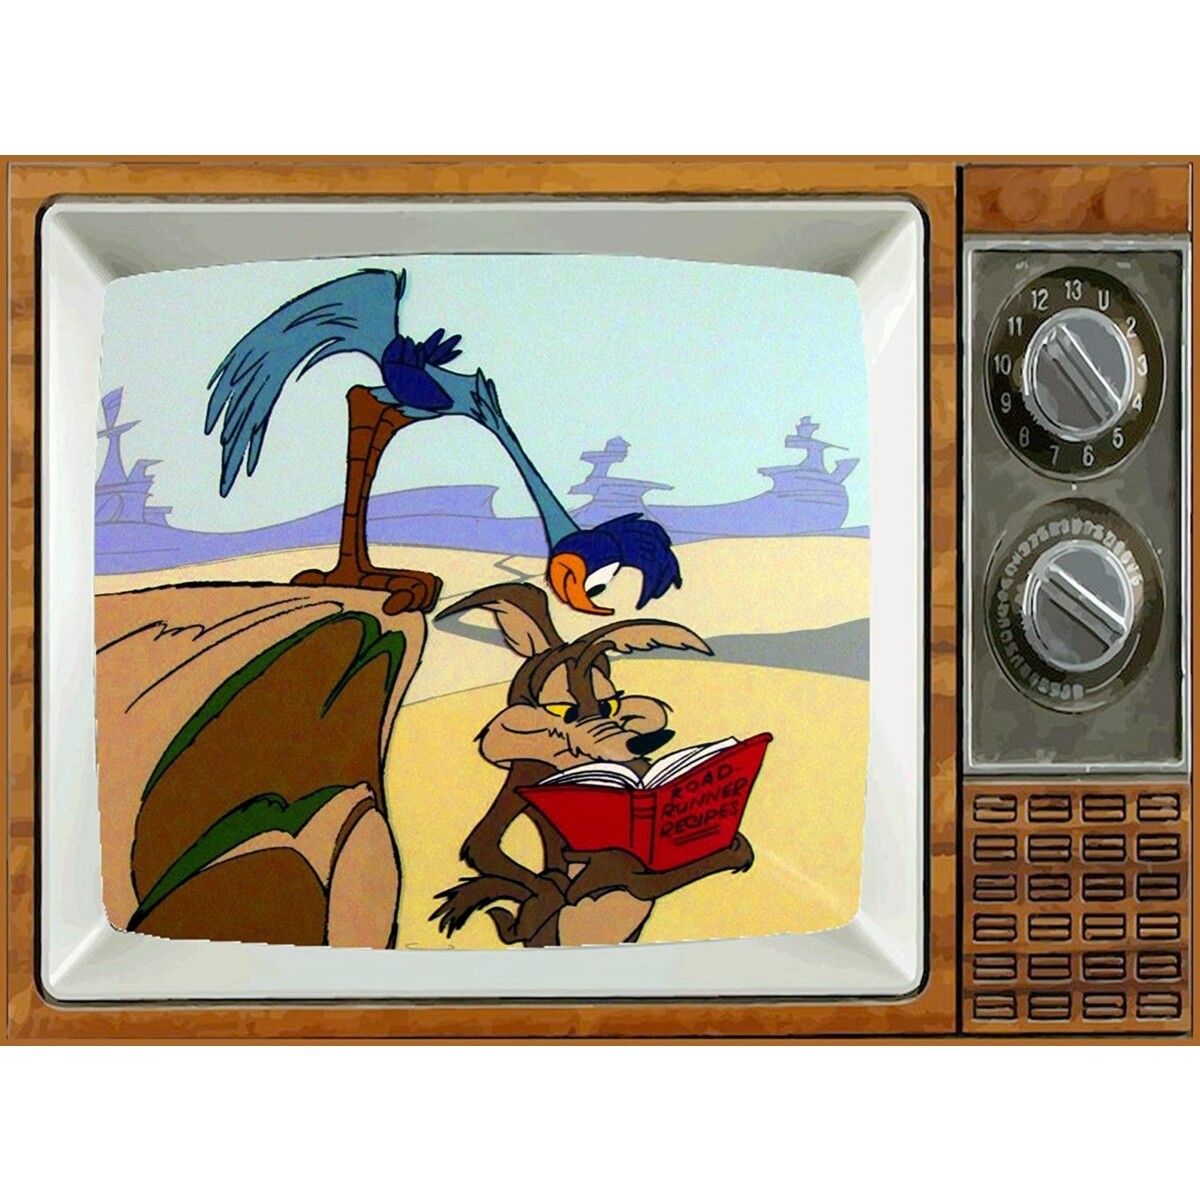 Road Runner and Wile E Coyote Looney Tunes Metal TV Magnet